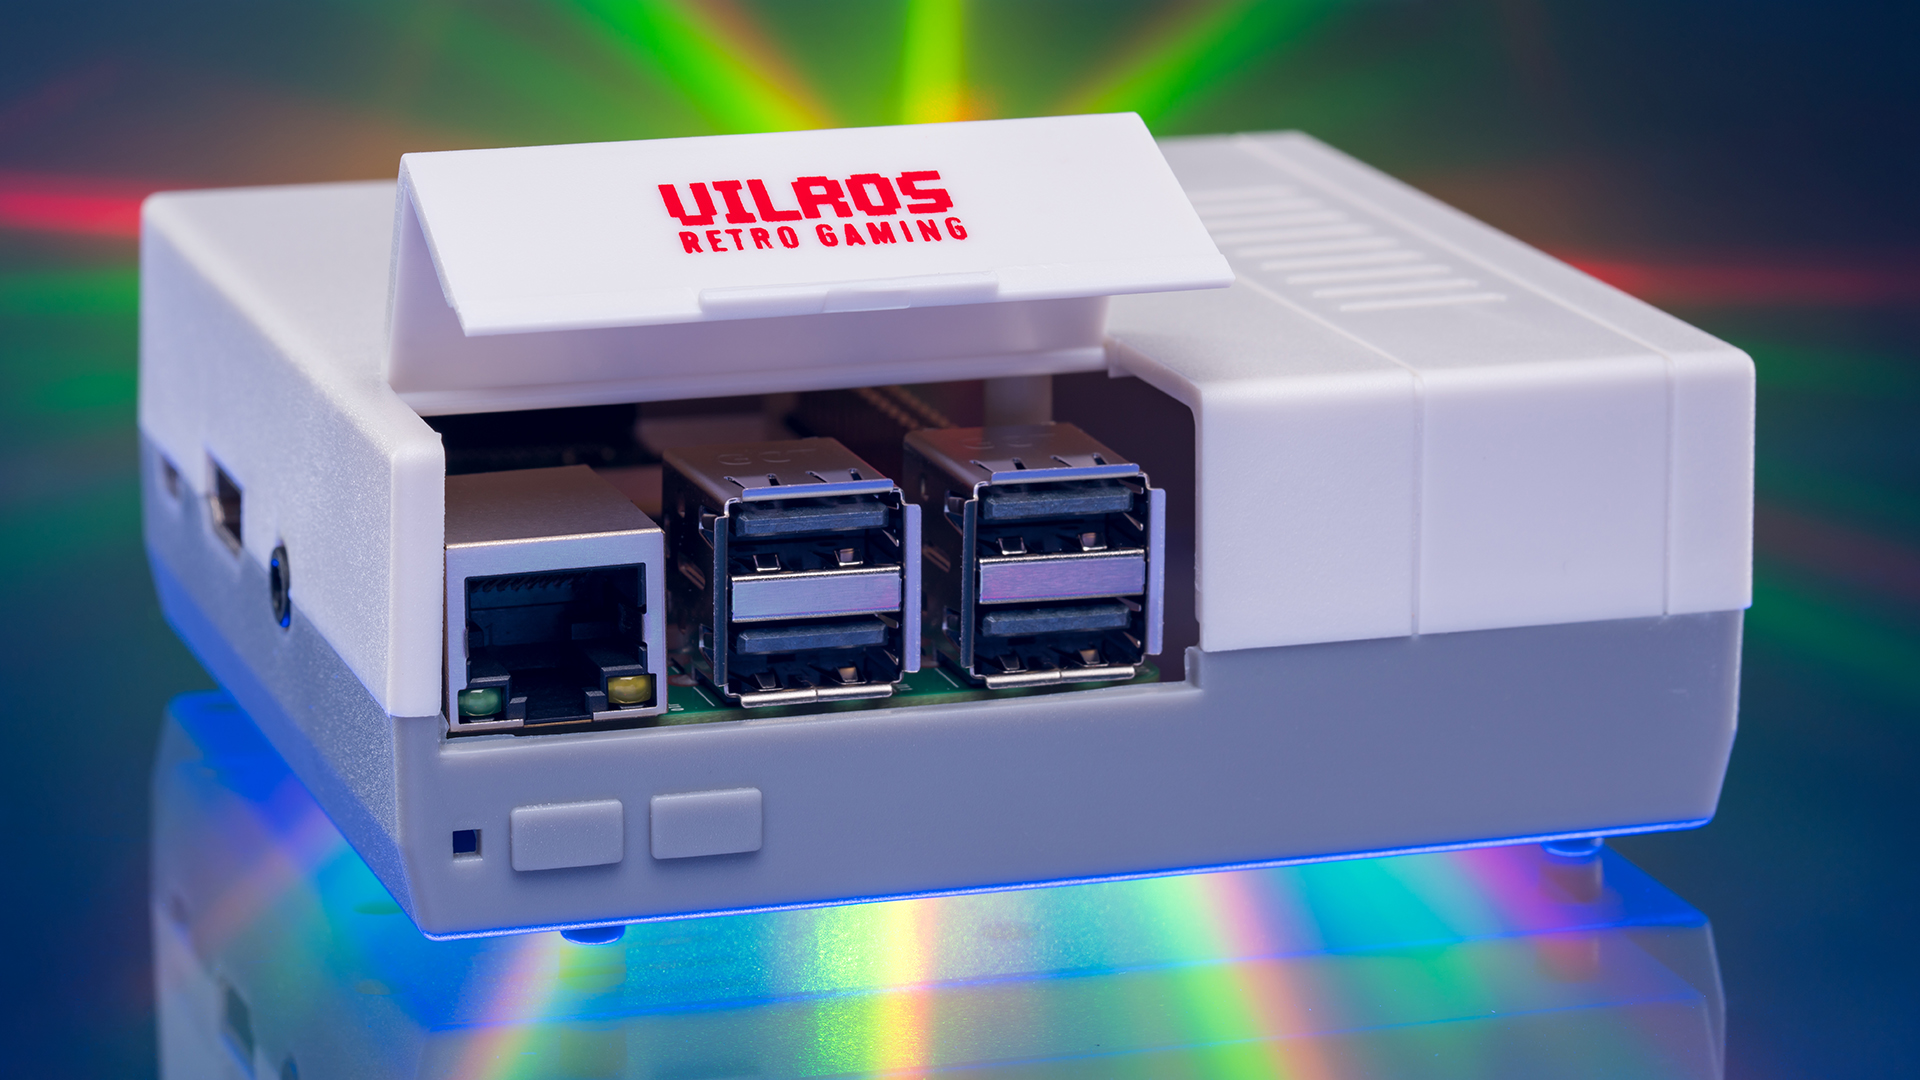 A Vilros Retro Gaming Kit is the perfect RetroPie Console for